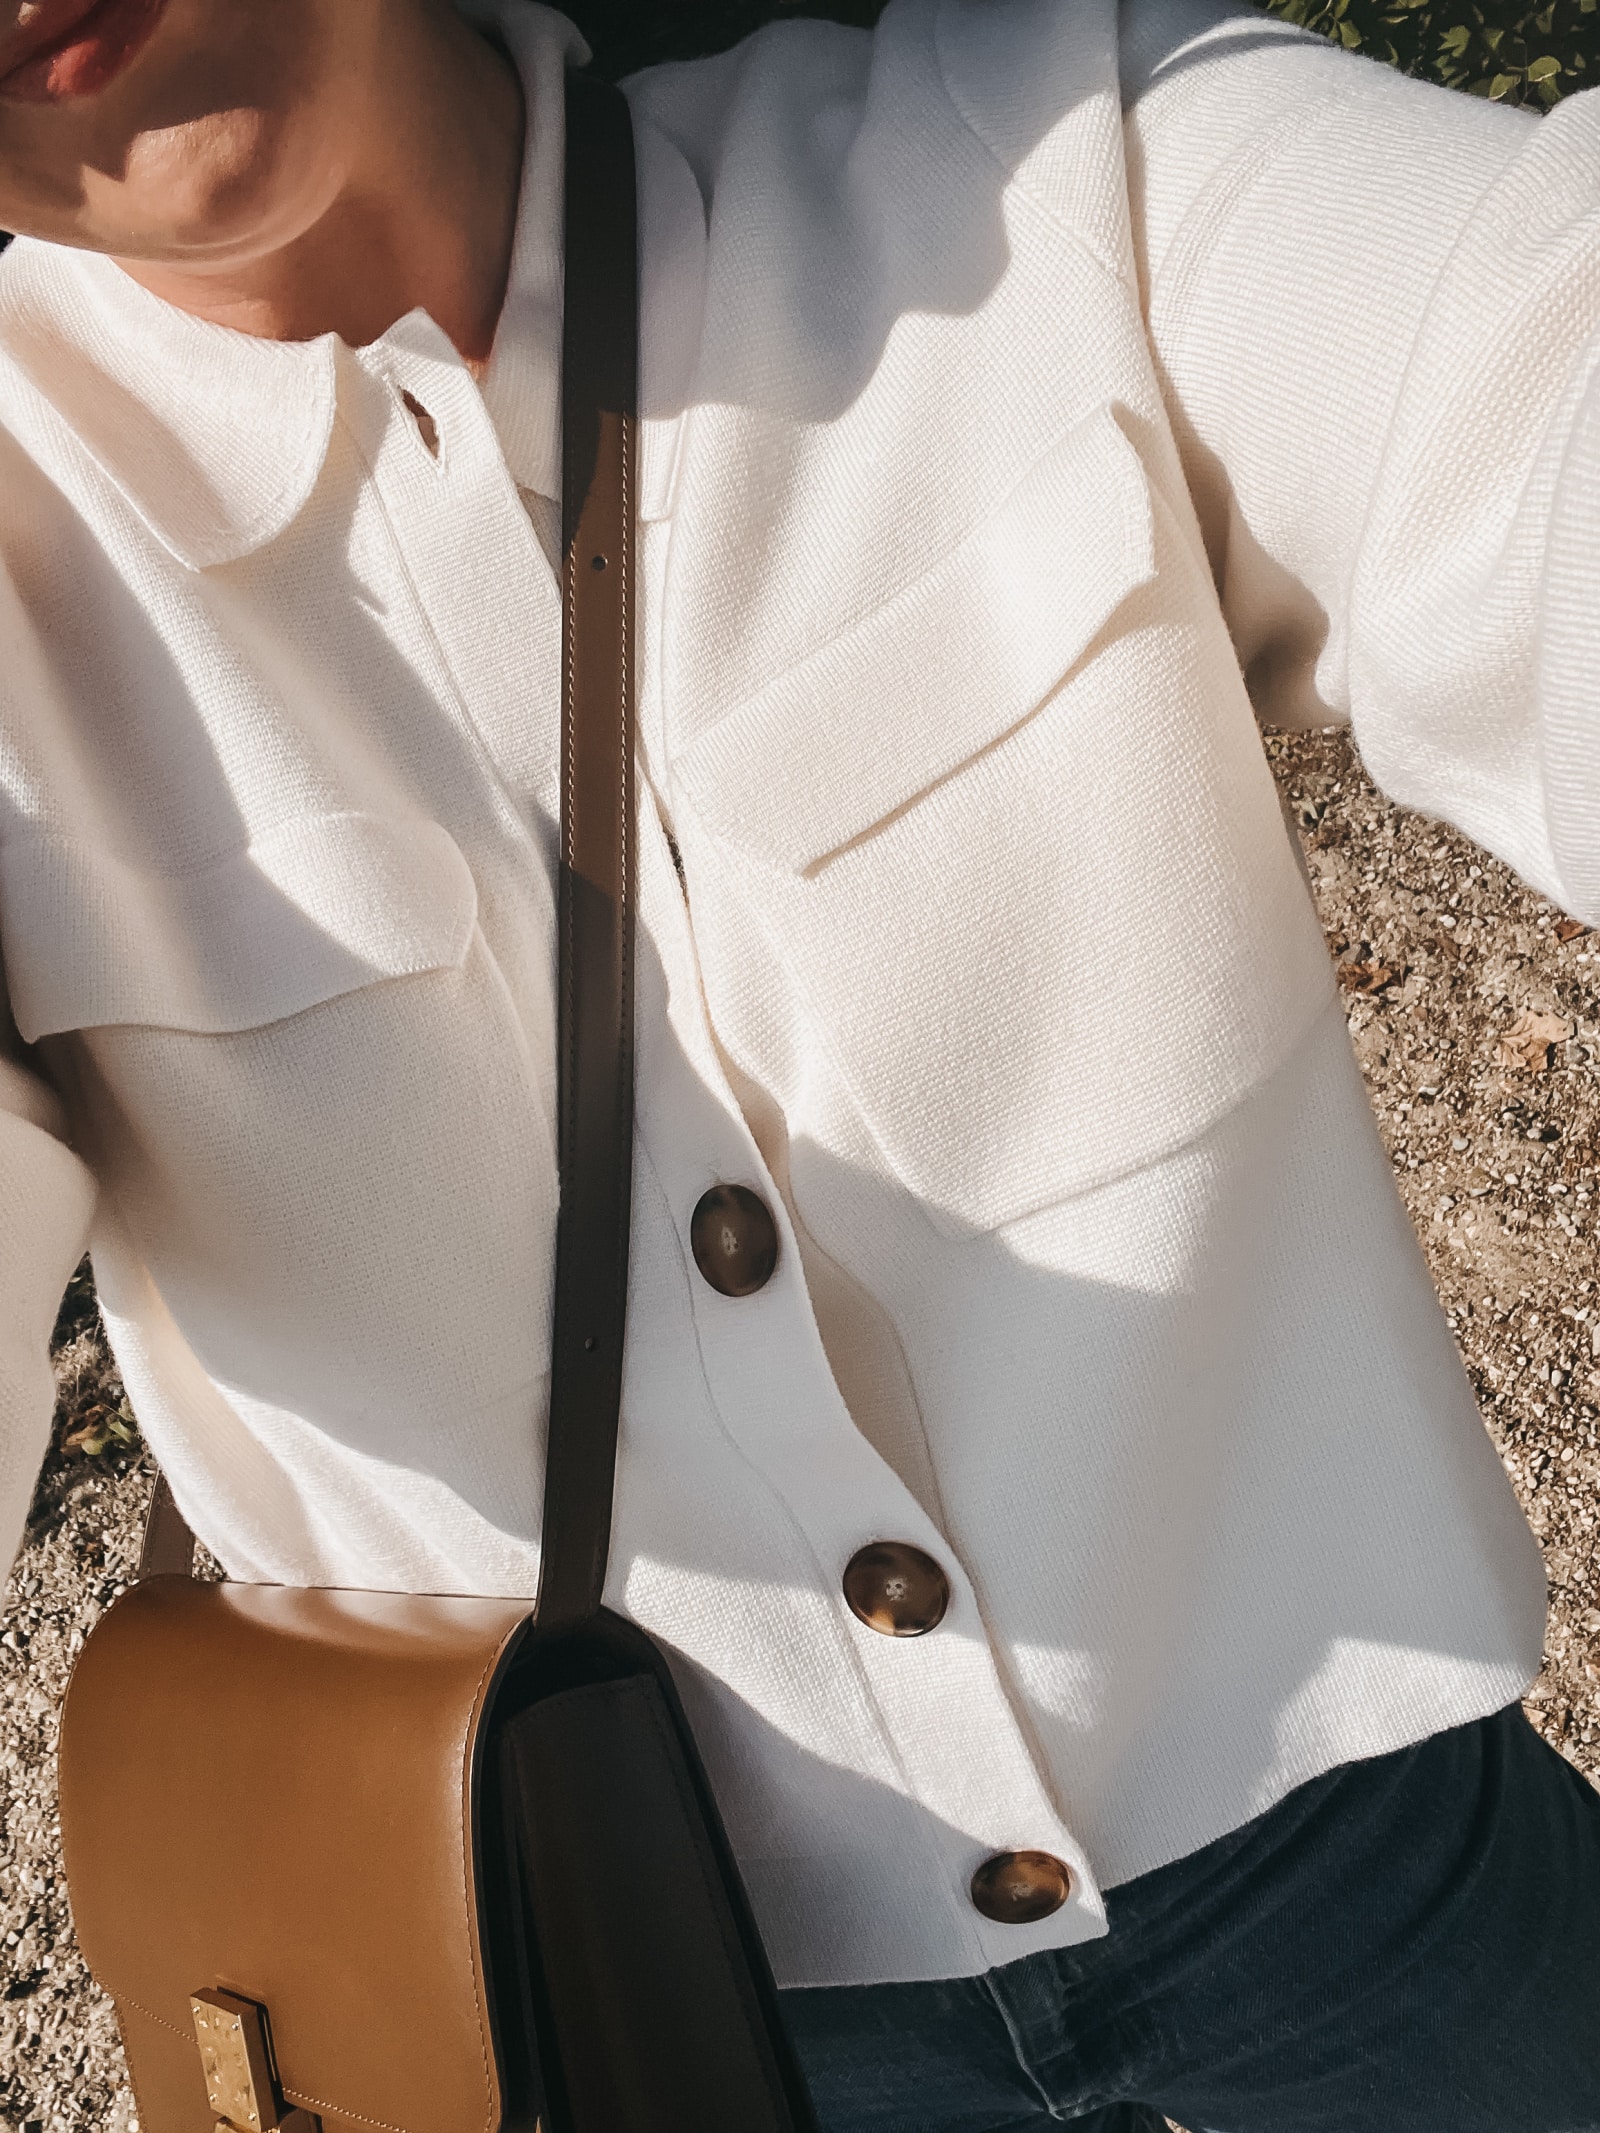 Sezane Sweater Jacket | Things in My Closet I Can't Wait to Wear This Fall